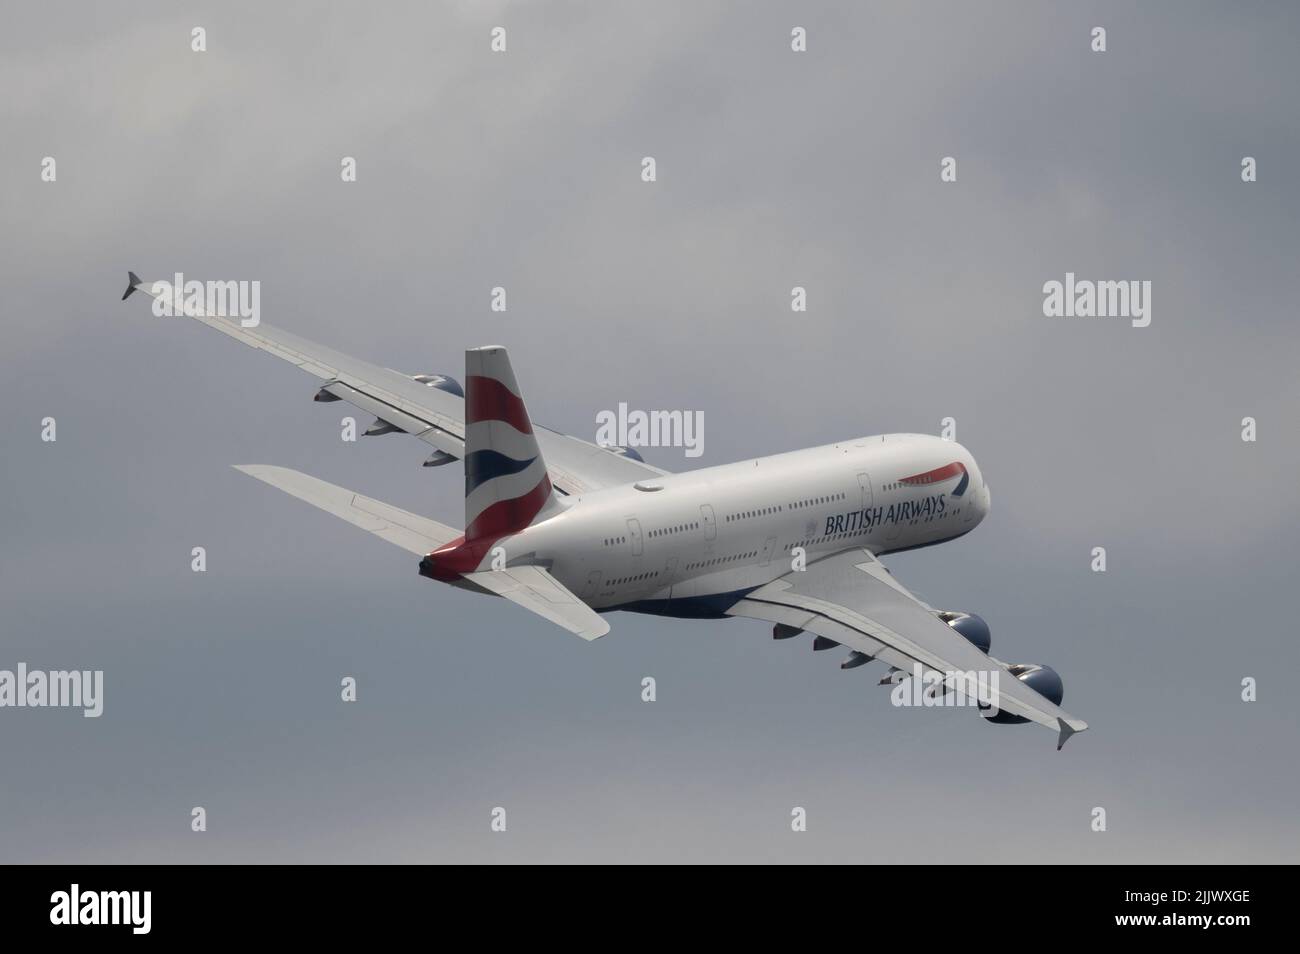 Heathrow Airport, London, UK. 28 July 2022. British Airways Airbus A380 G-XLEF taking off from Southern runway at Heathrow on London to Dallas route Stock Photo